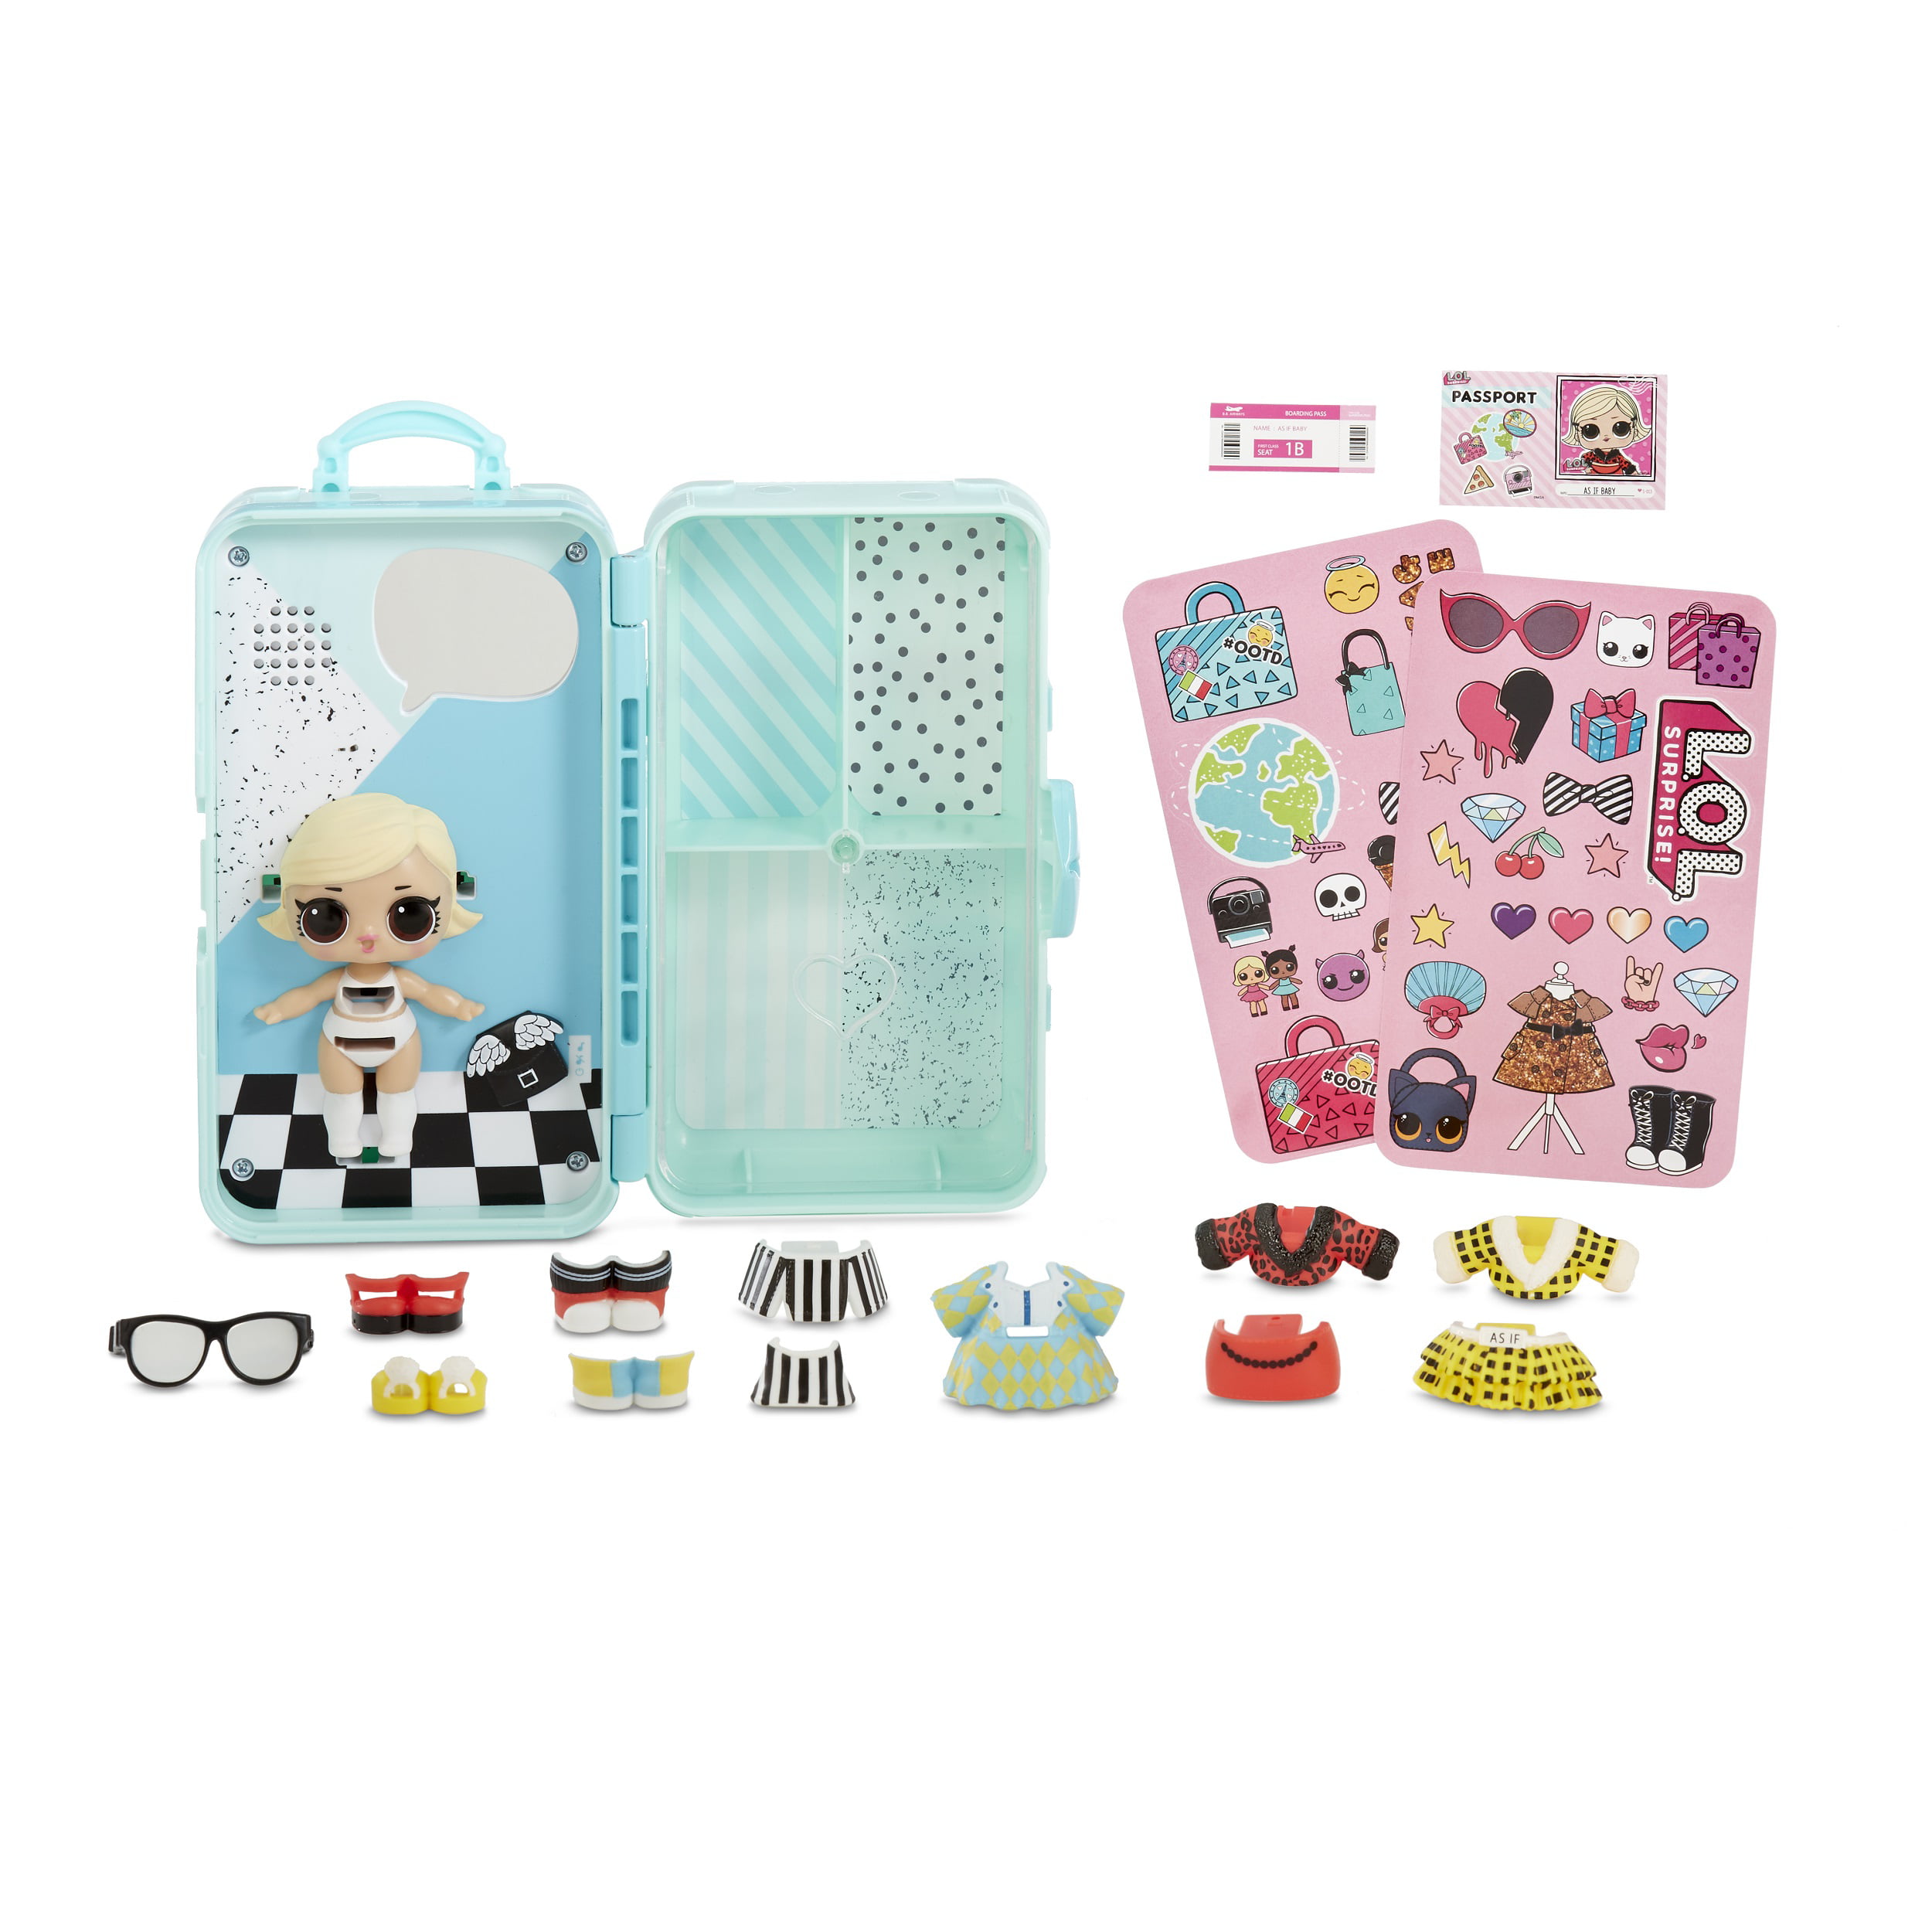 L.O.L Surprise! Style Suitcase - As If Baby Doll Playset - Walmart.com